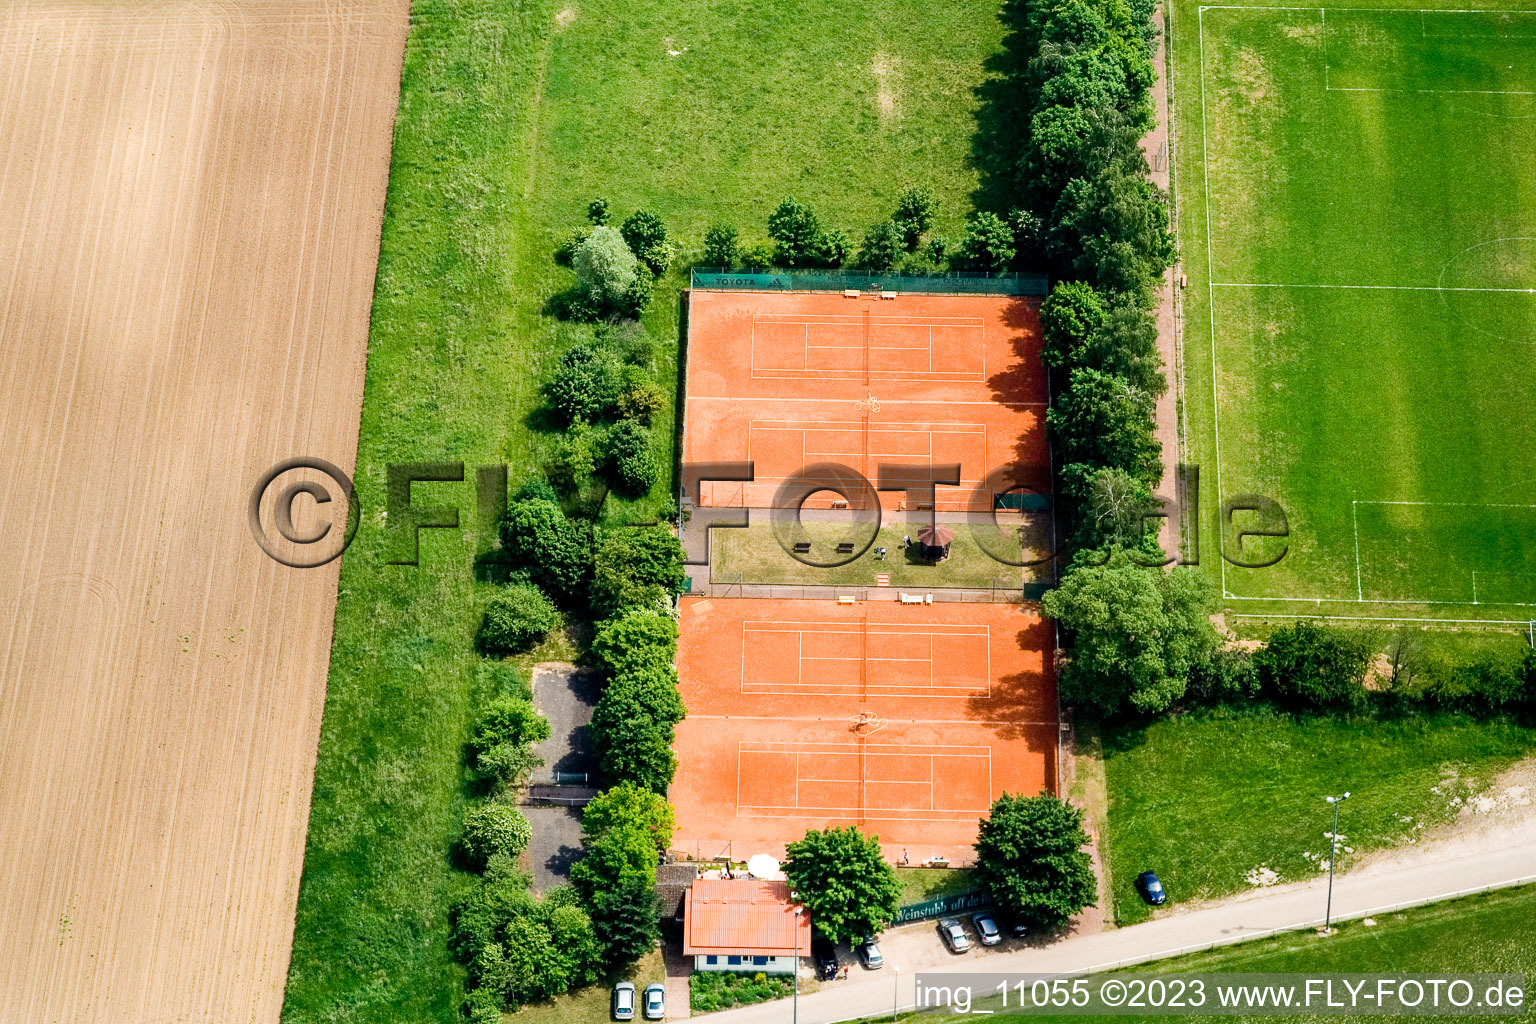 Aerial view of Tennis club in Minfeld in the state Rhineland-Palatinate, Germany